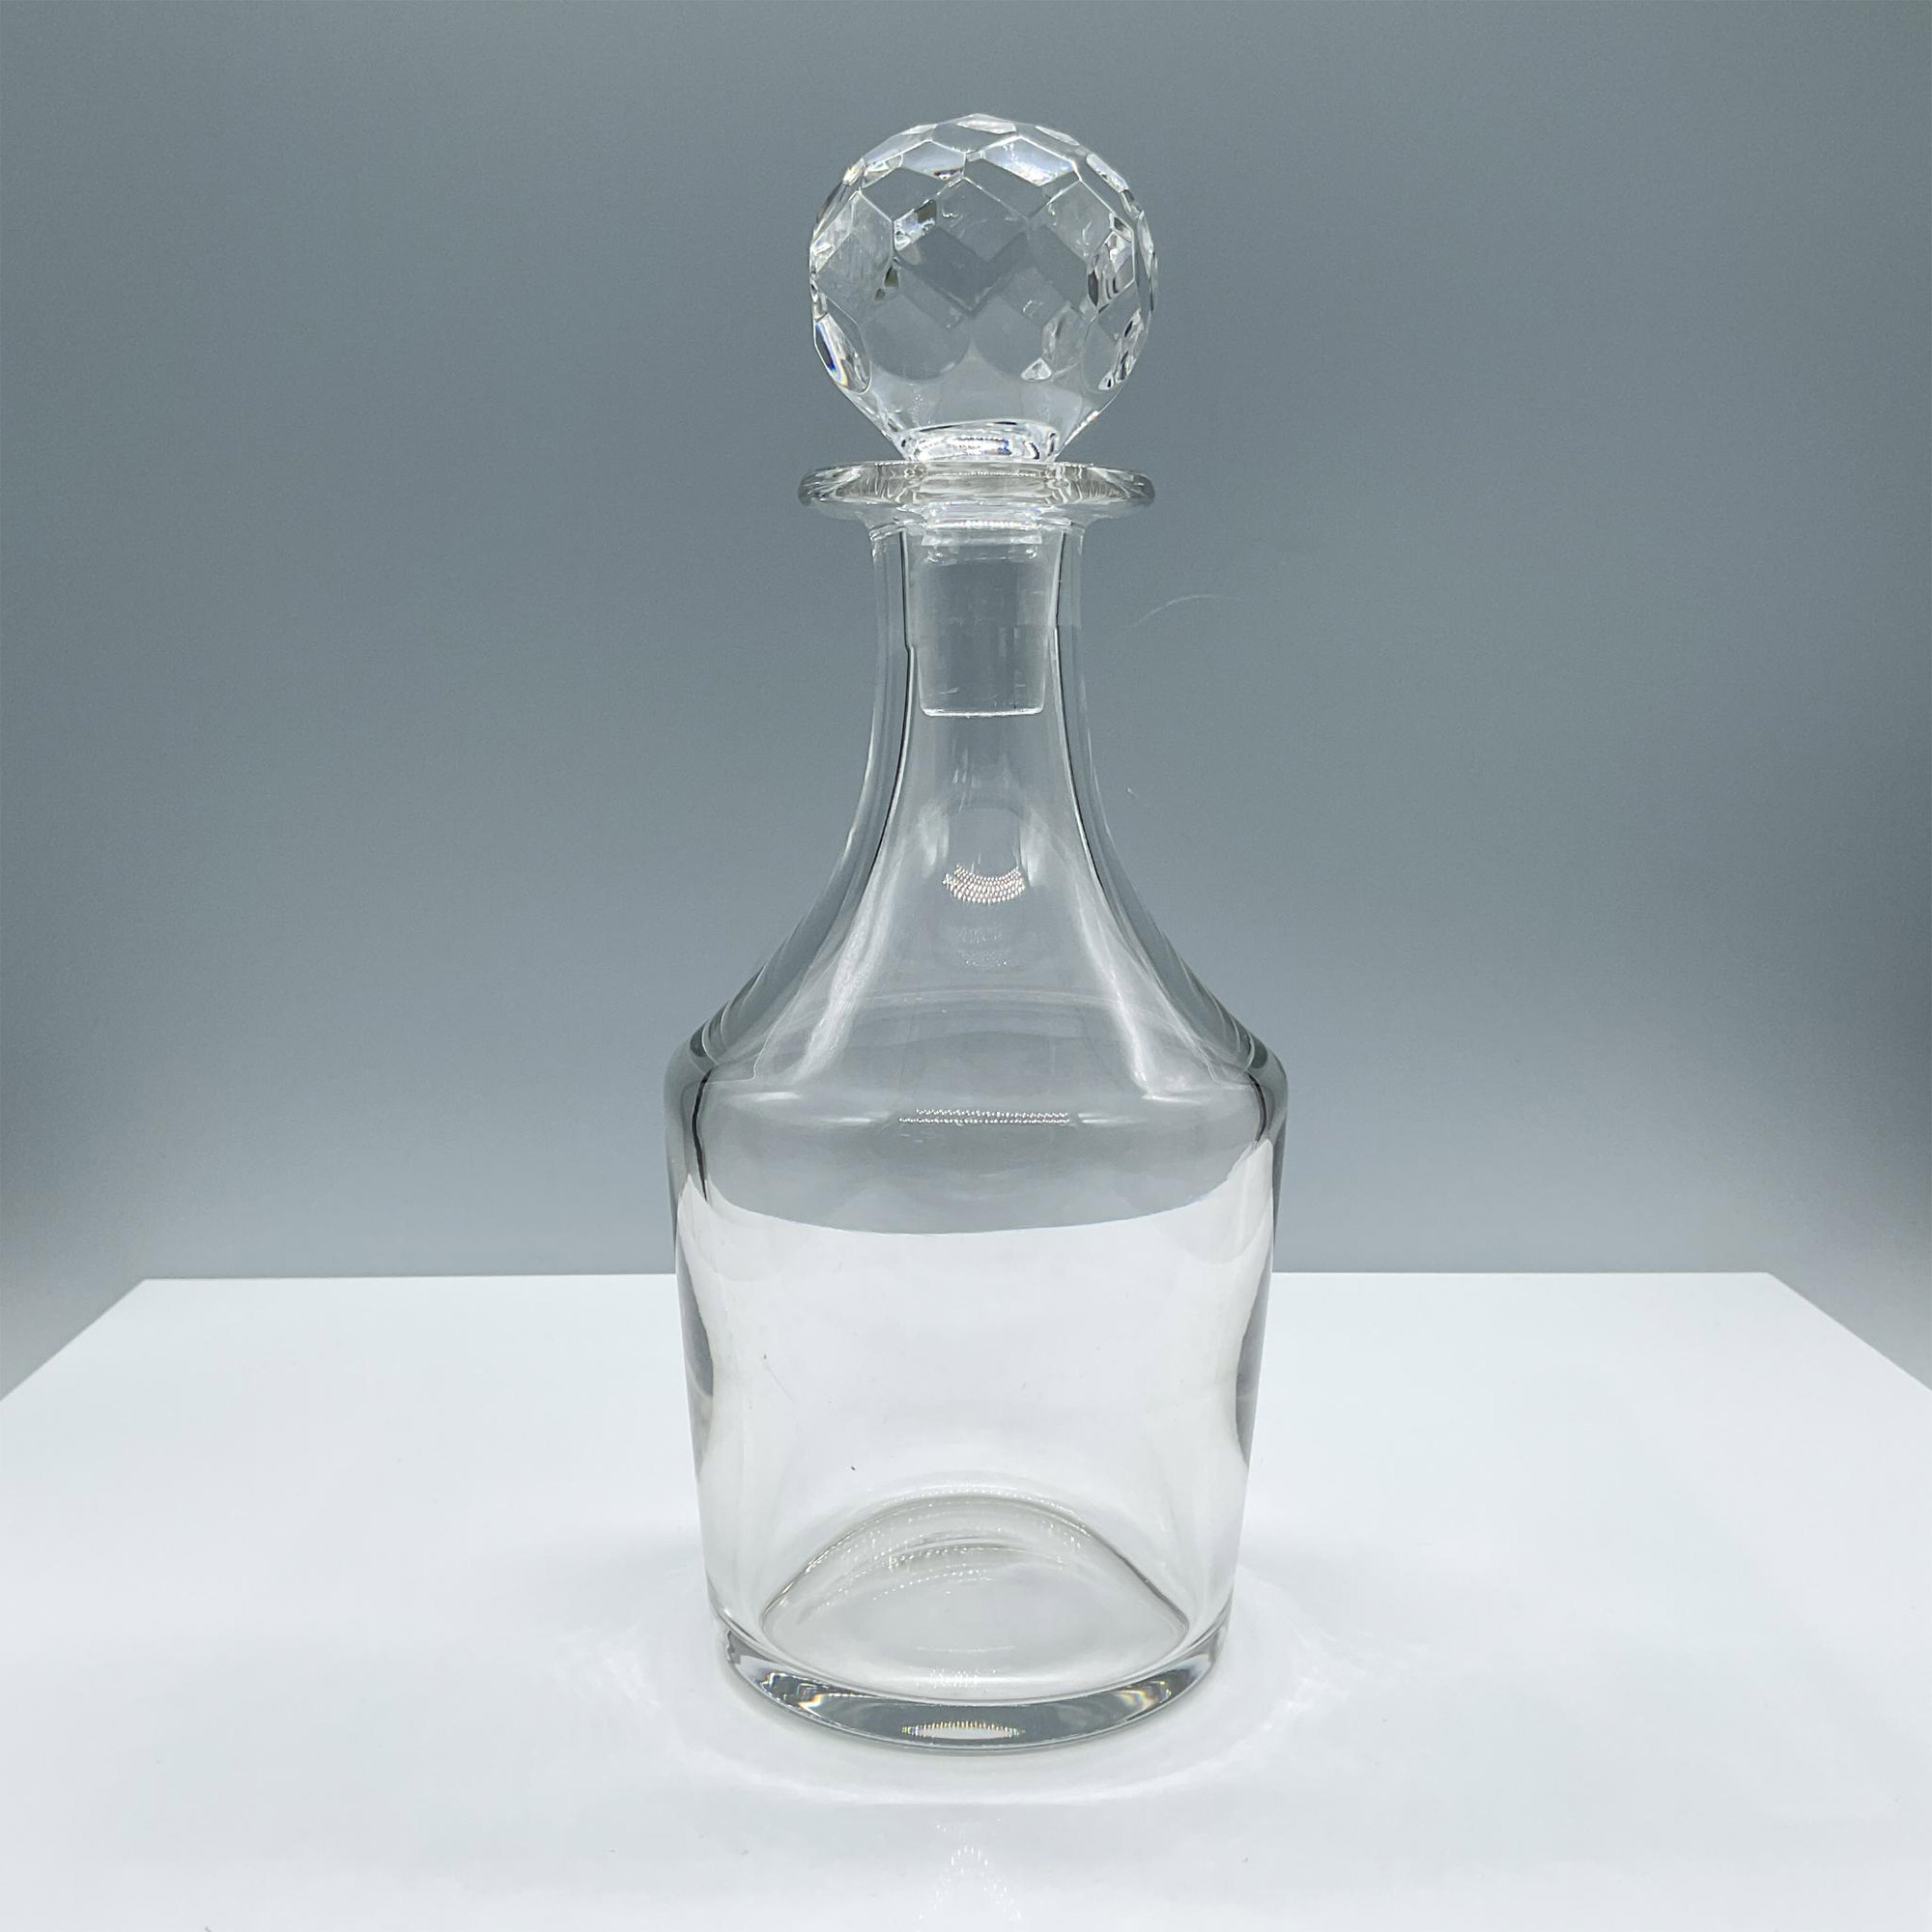 Baccarat Crystal Whiskey Decanter with Stopper, Embassy